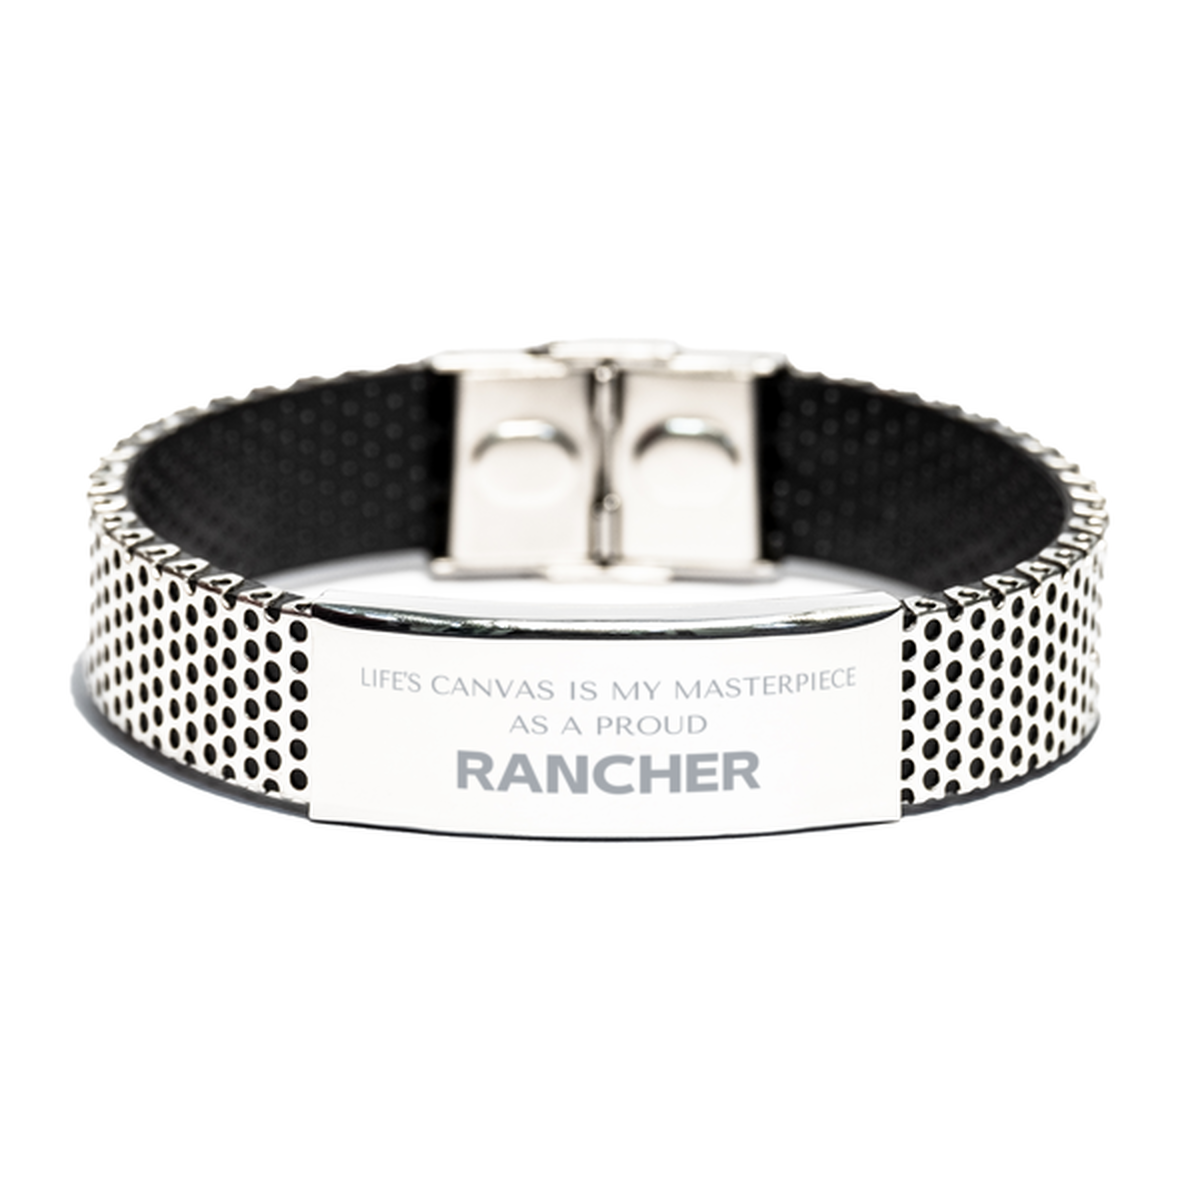 Proud Rancher Gifts, Life's canvas is my masterpiece, Epic Birthday Christmas Unique Stainless Steel Bracelet For Rancher, Coworkers, Men, Women, Friends